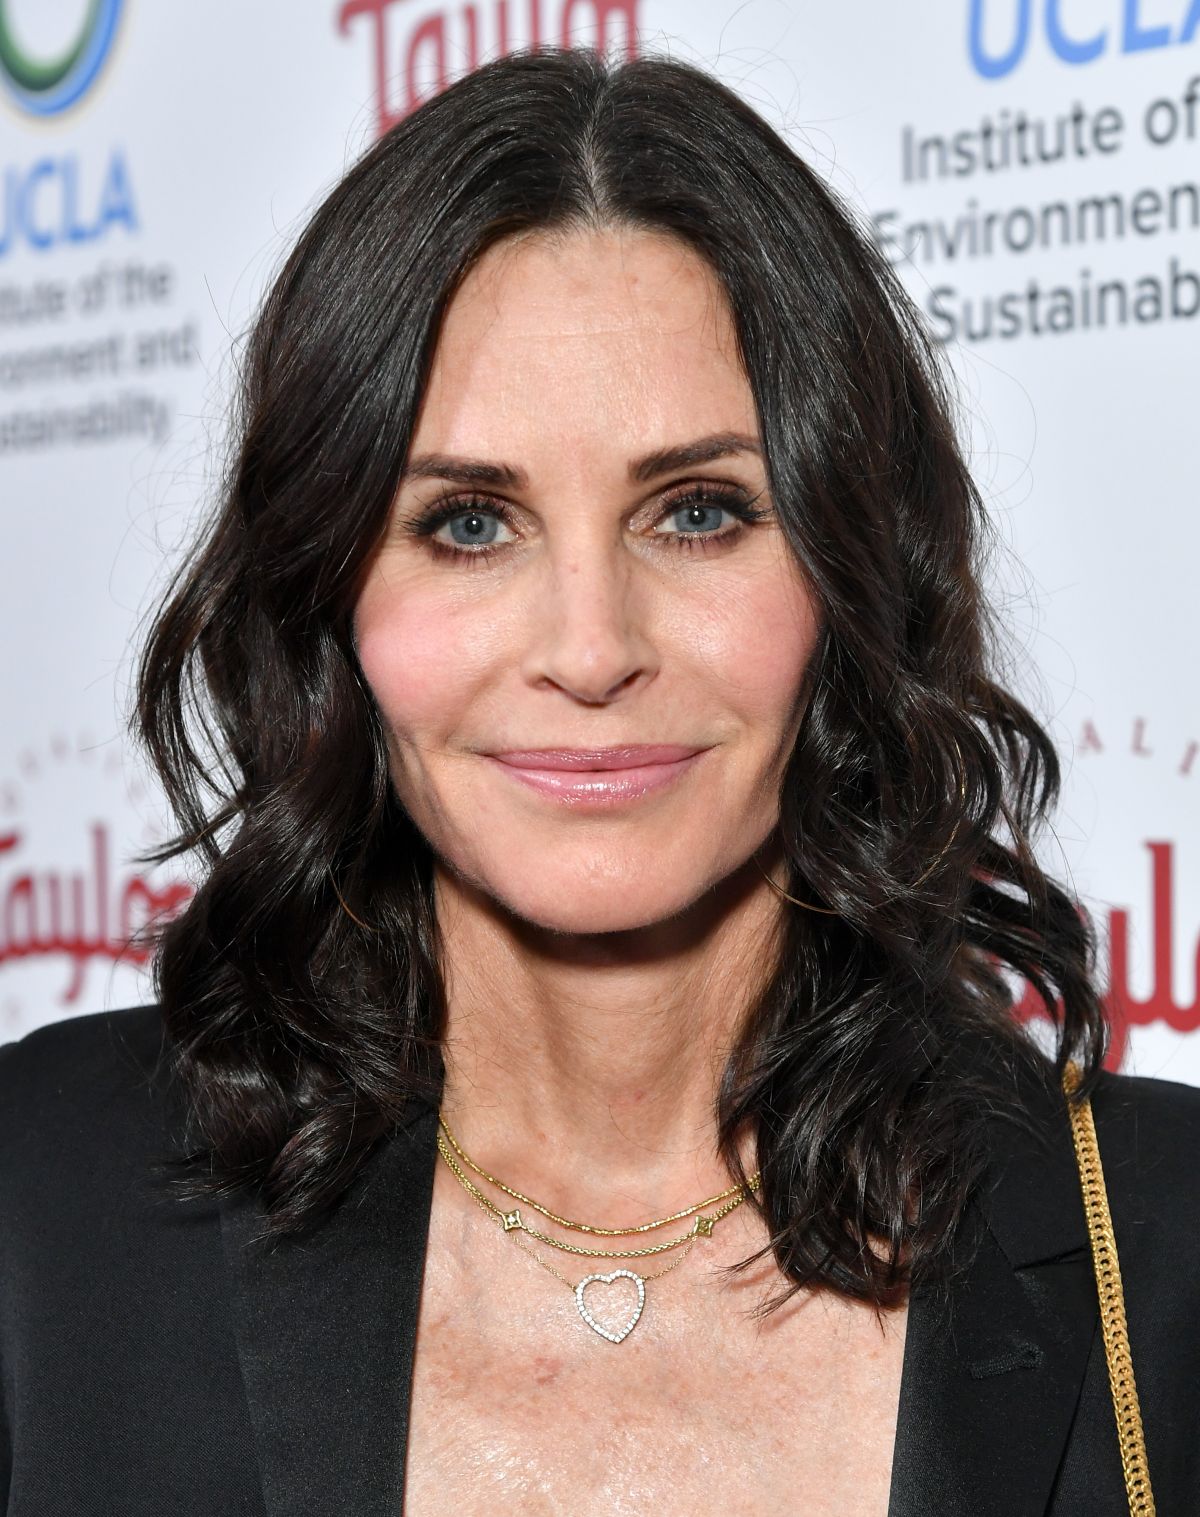 COURTENEY COX at Ucla's Institute of the Environment and ...